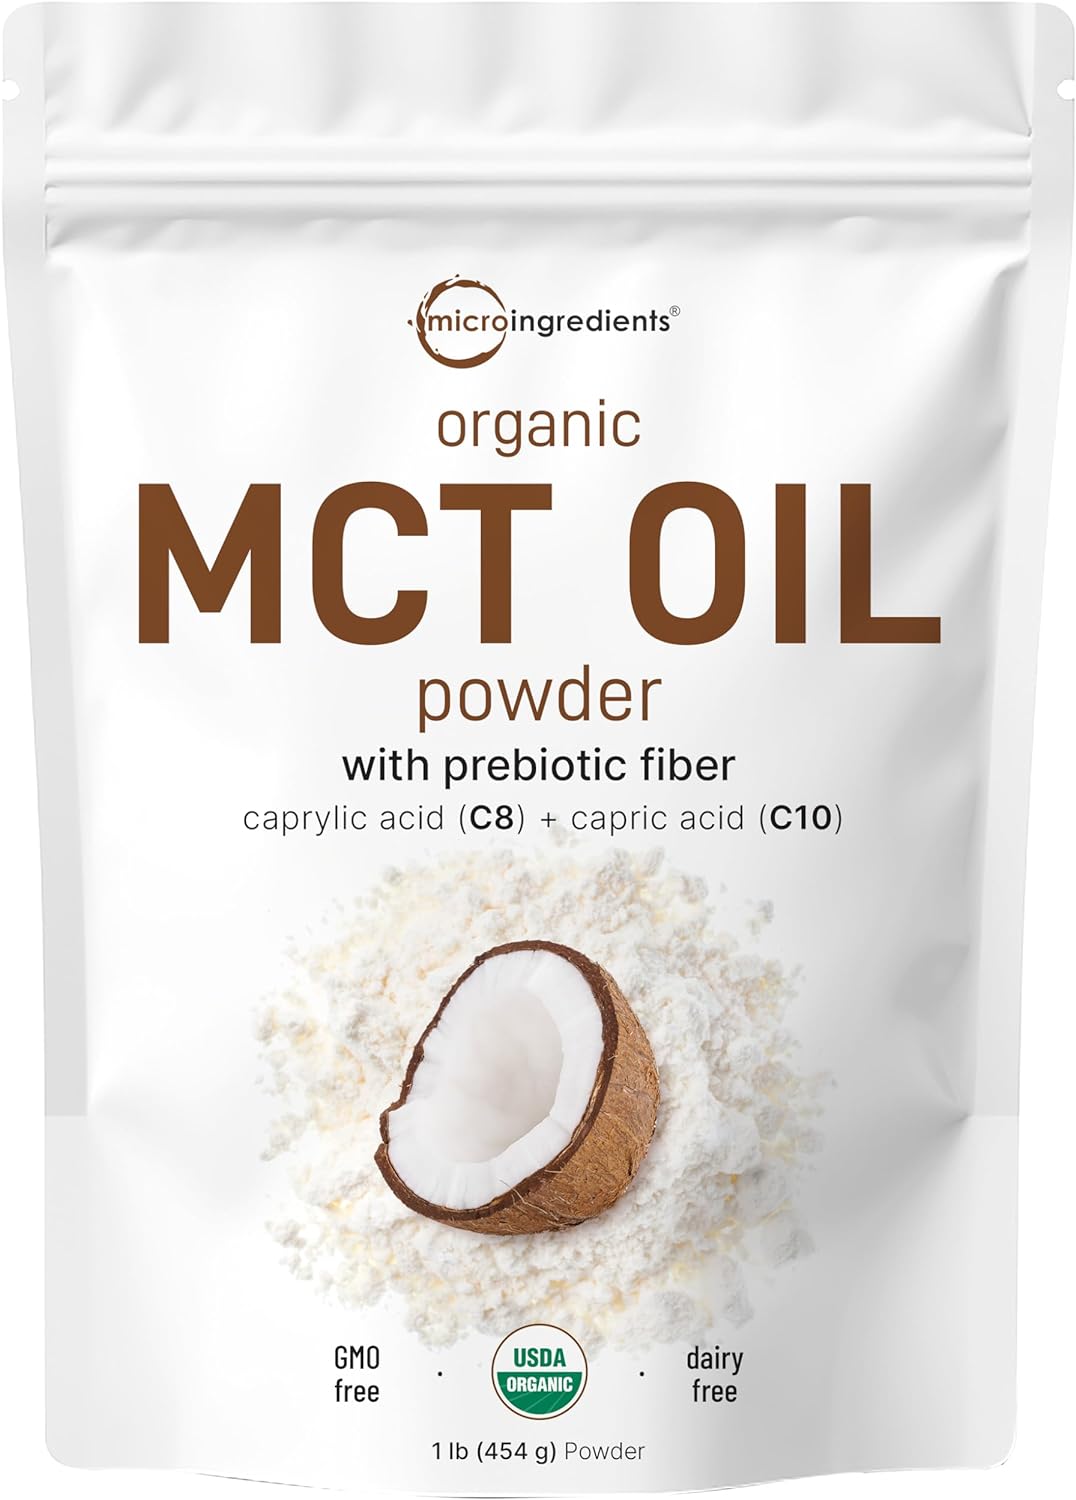 Micro Ingredients Organic MCT Oil Powder with Prebiotic Fiber,1 Pound(16 Ounce), Fast Fuel for Body and Brain, C8 MCT Oil for Coffee Creamer, No GMOs, Keto Diet, Vegan